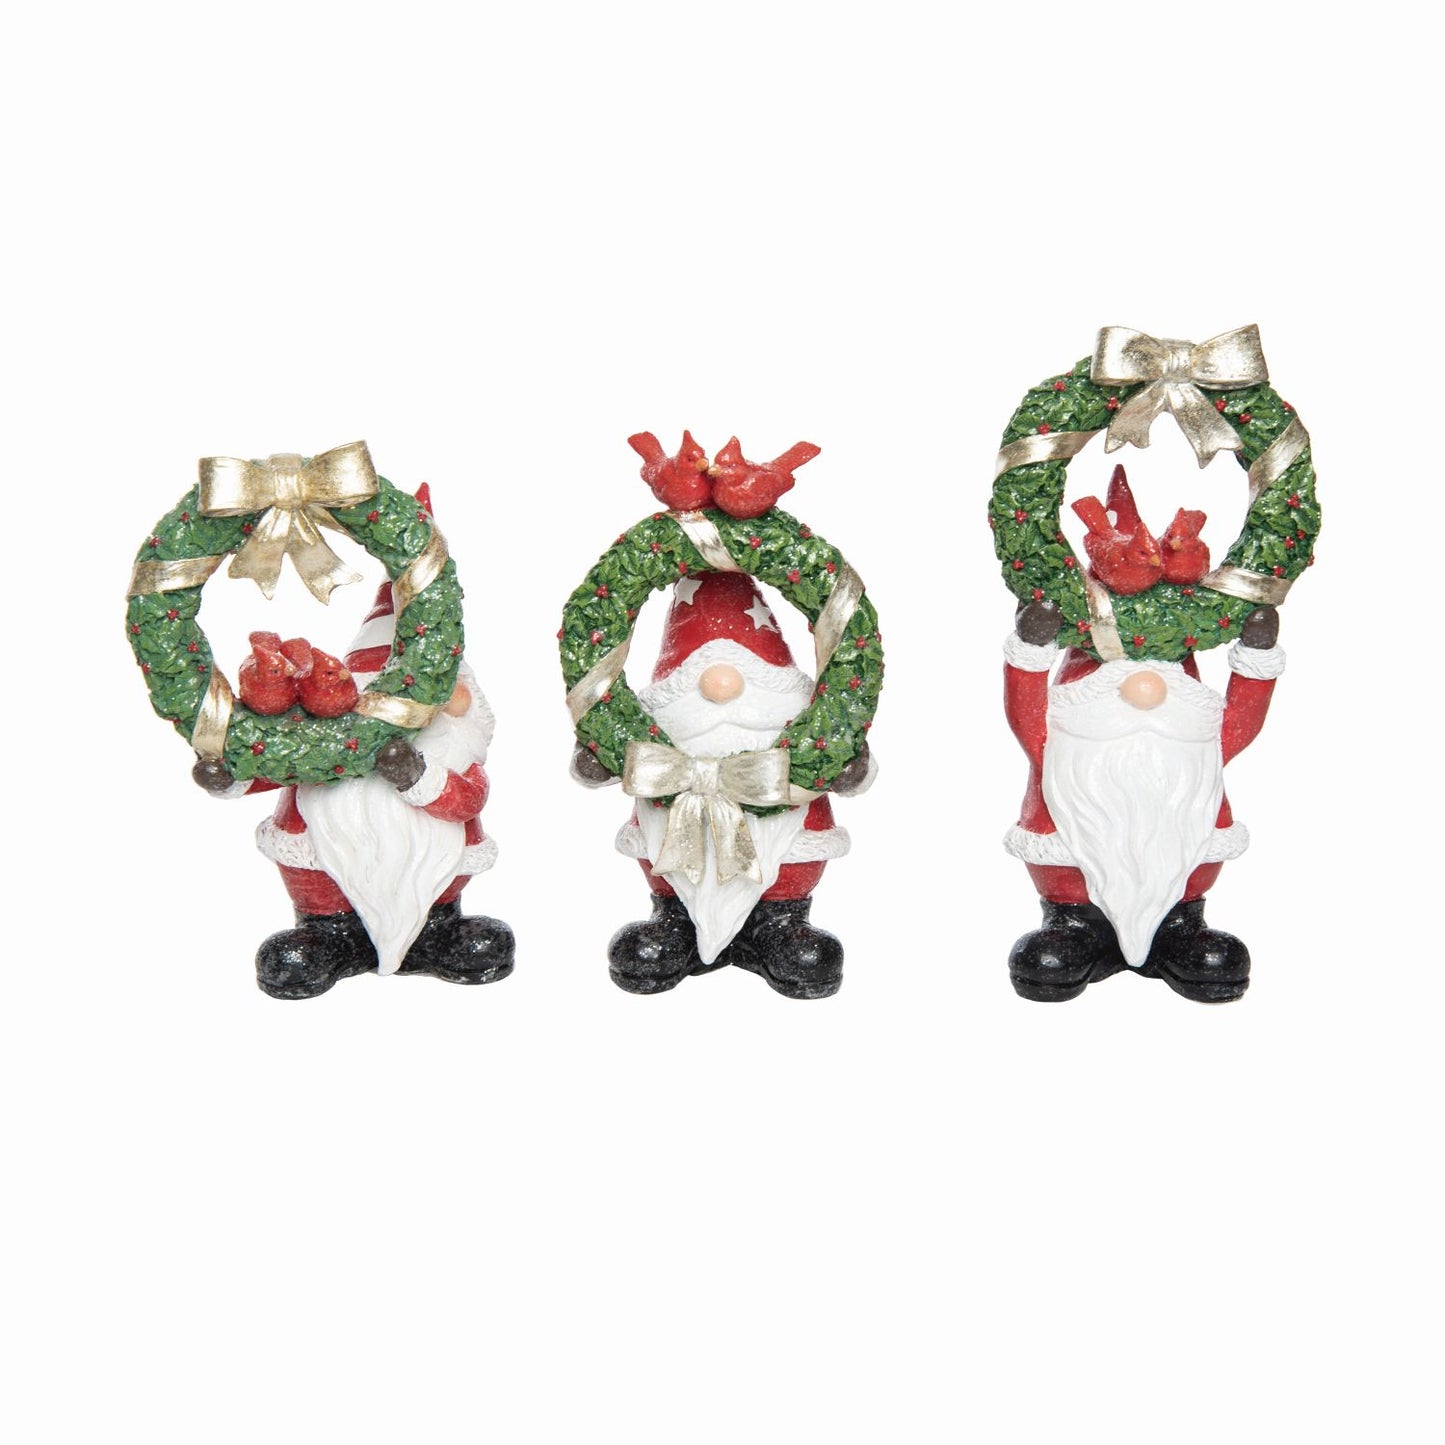 Transpac Resin Gnome With Wreath Figurine, Set Of 3, Assortment